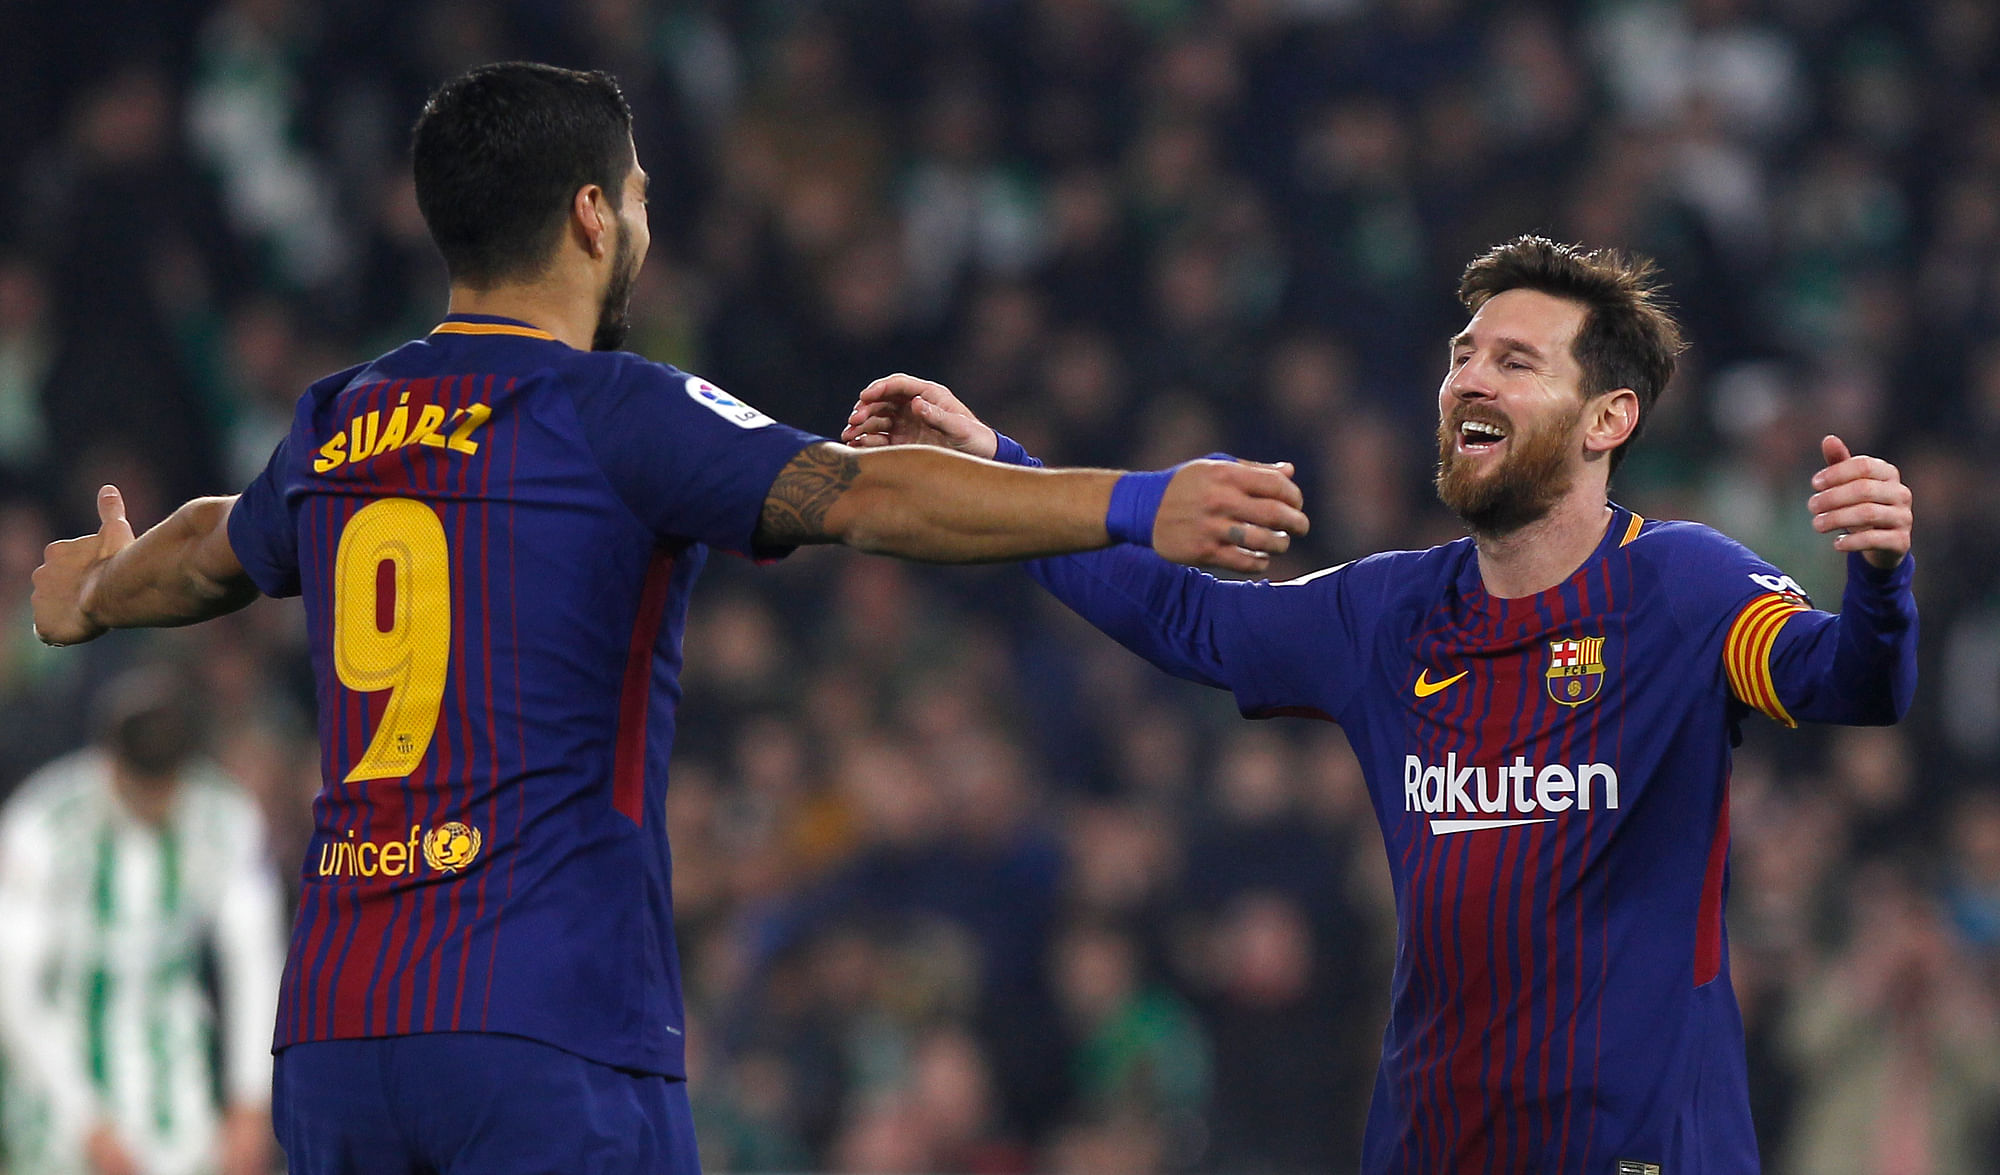 File picture of Barcelona stars Lionel Messi and Luis Suarez celebrating during a La Liga game against Real Betis.